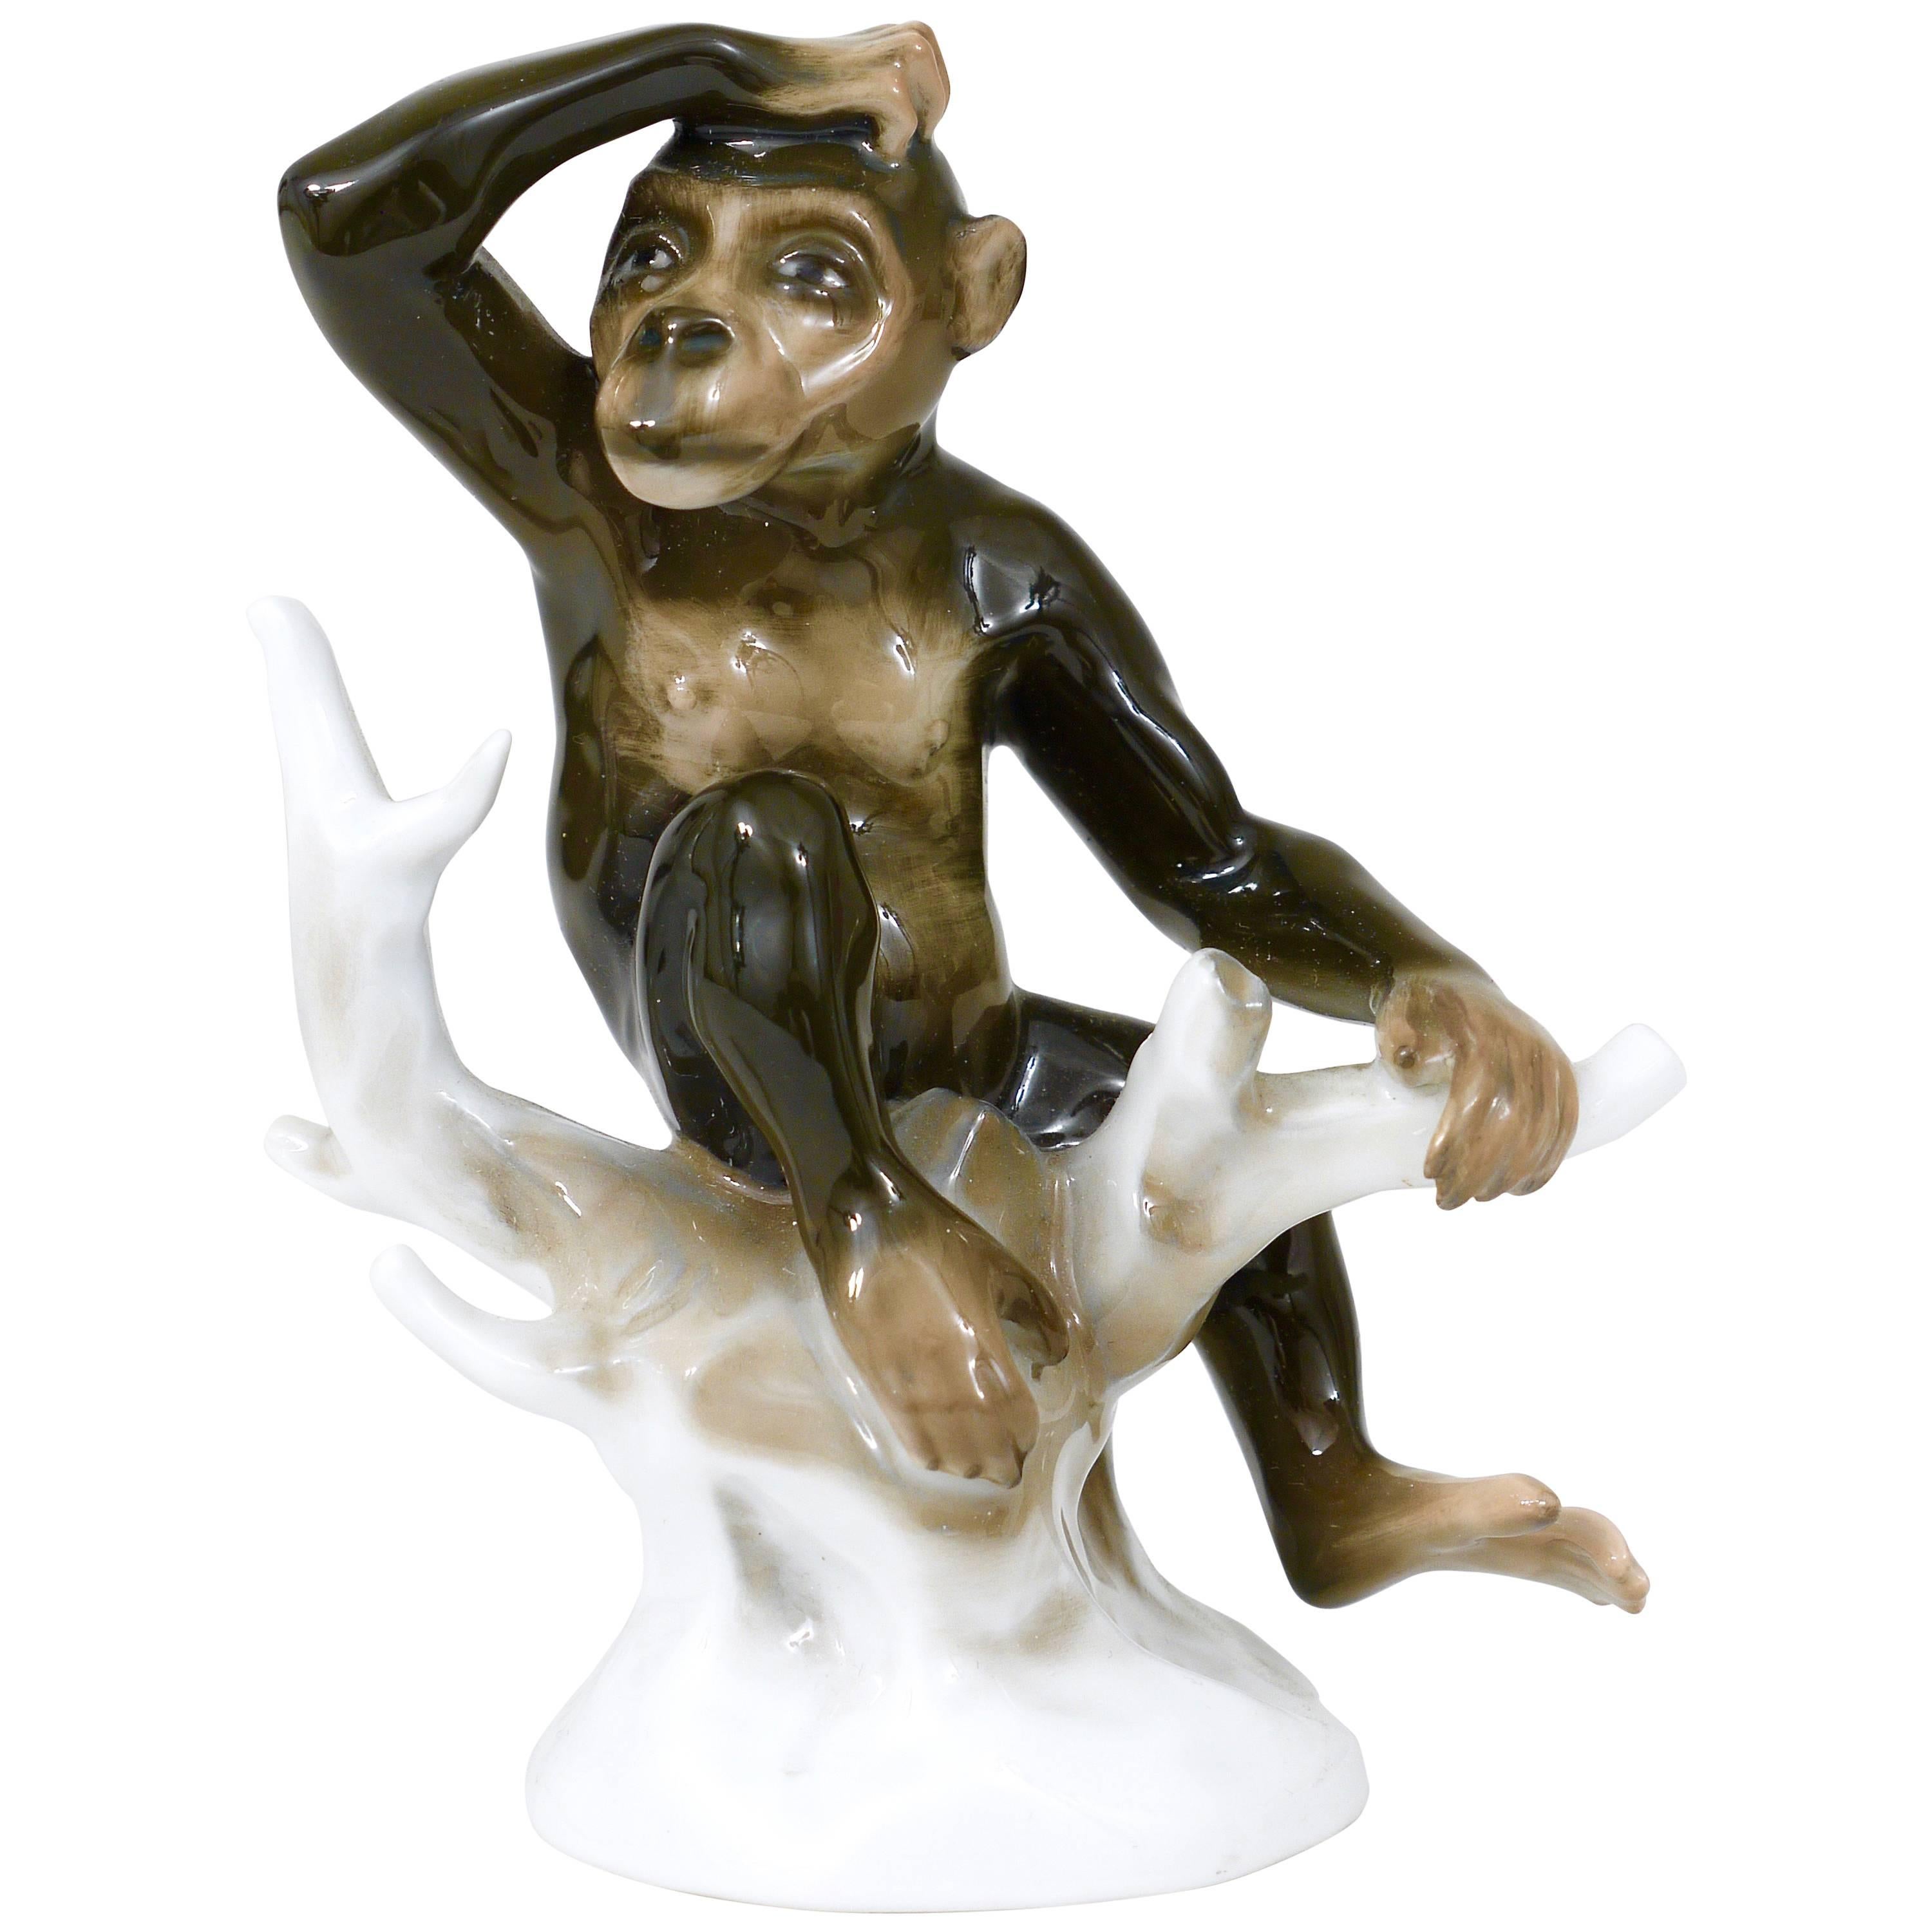 Monkey on a Branch, Porcelain Figurine by Otto Eichwald, Rosenthal, Germany